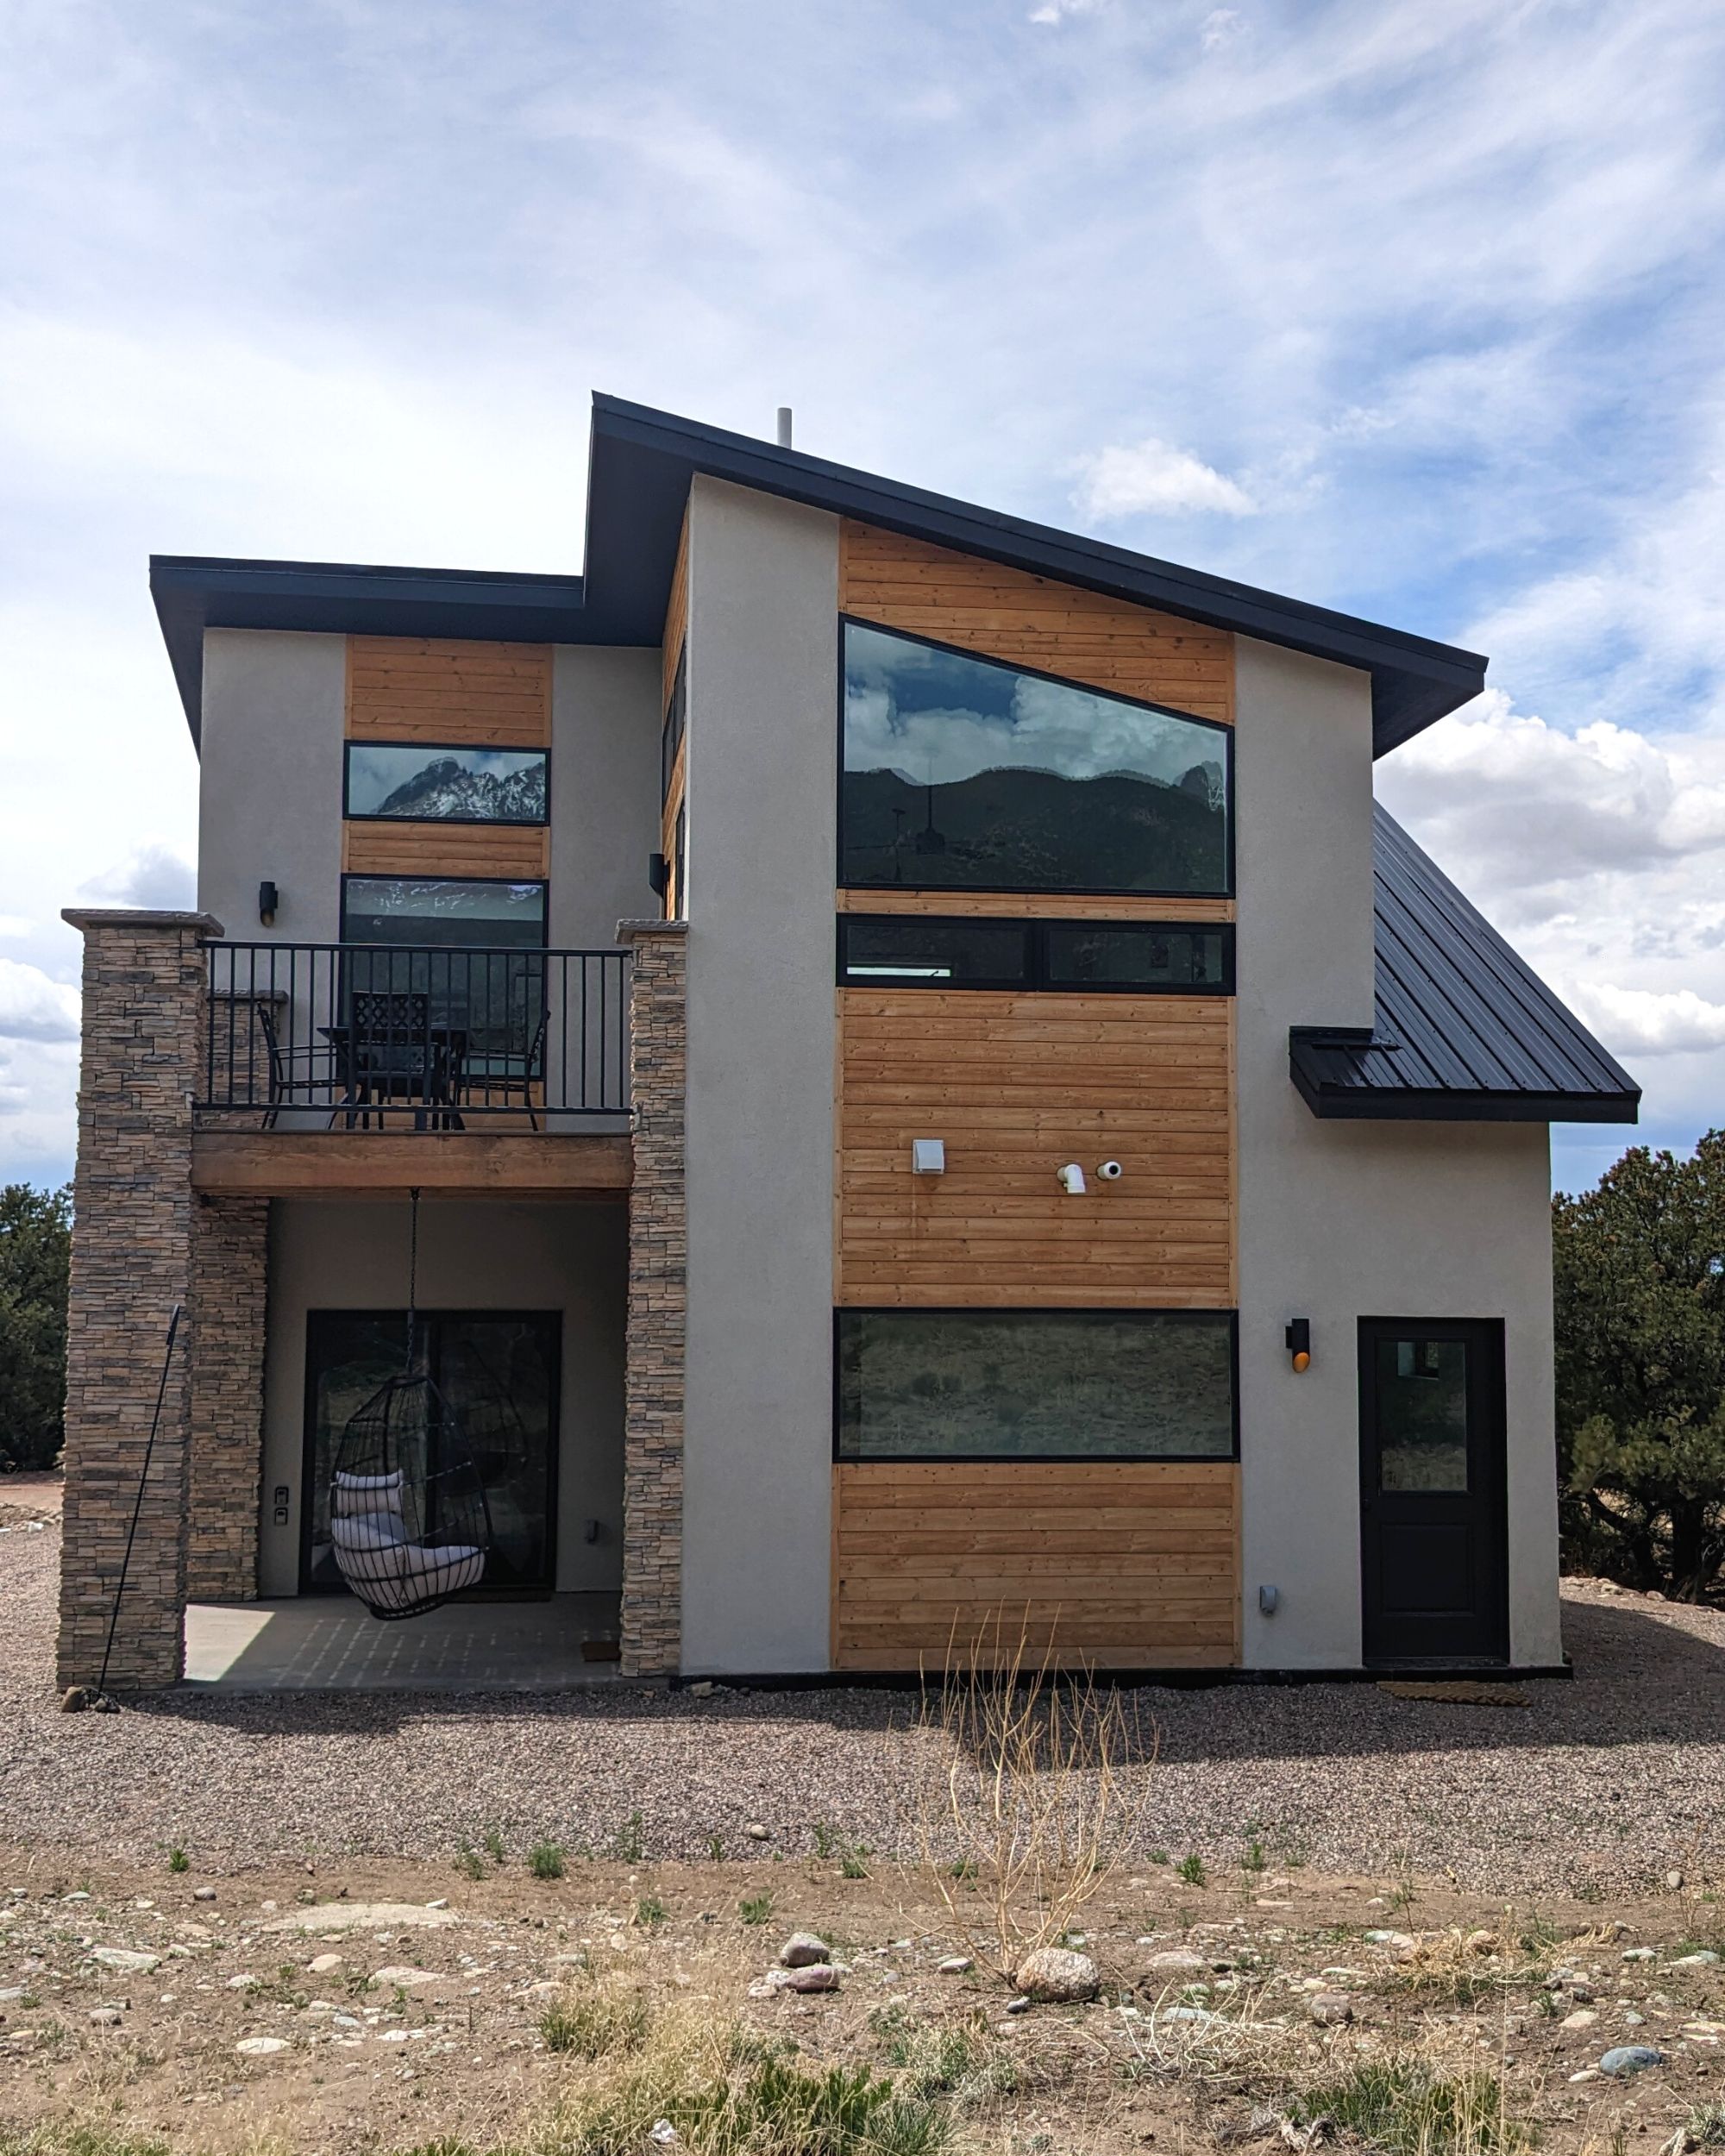 The Best Airbnb in Crestone, Colorado? Our Luxury Airbnb Experience